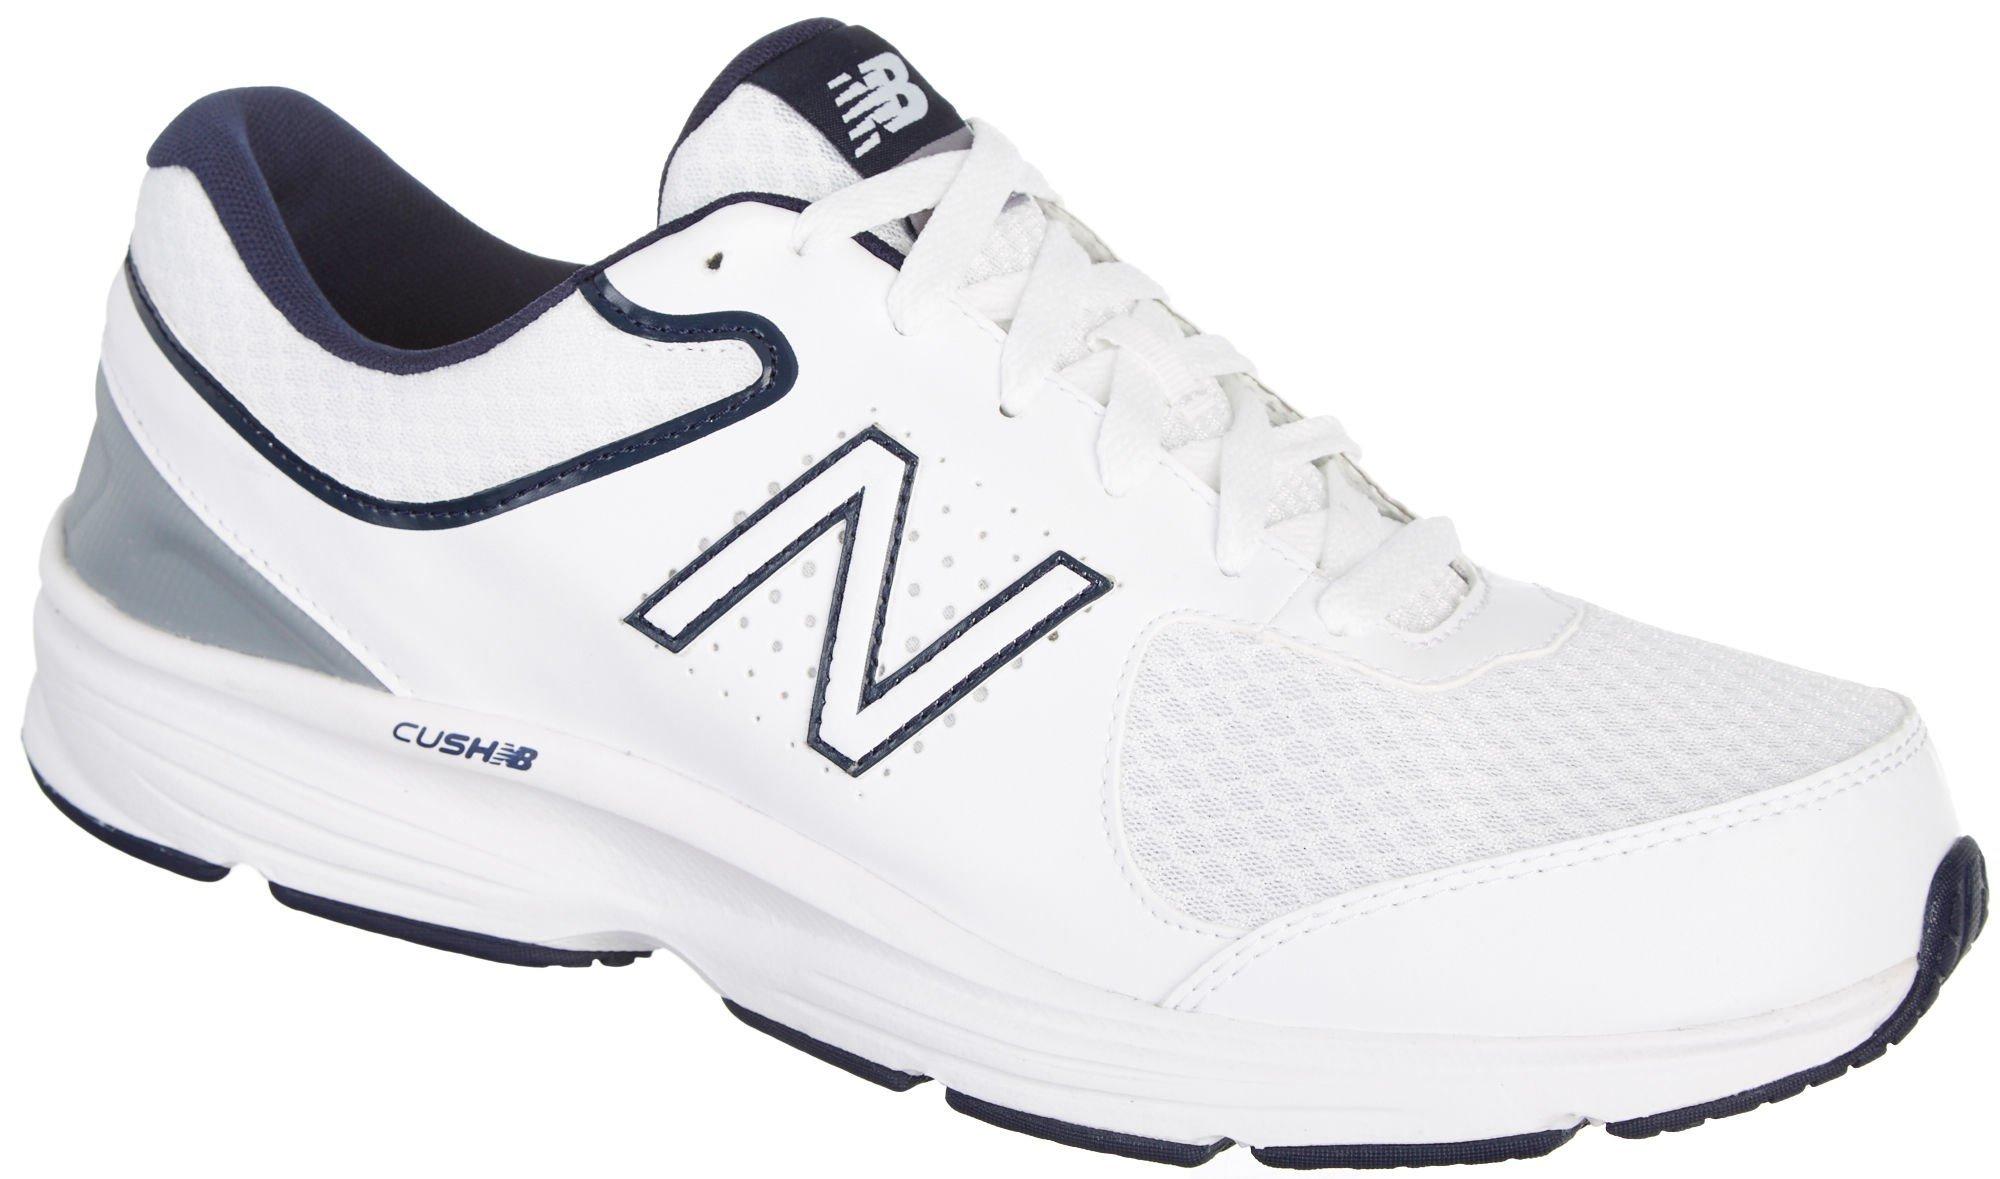 Men's Running Shoes | Sneakers & Athletic Shoes | Bealls Florida